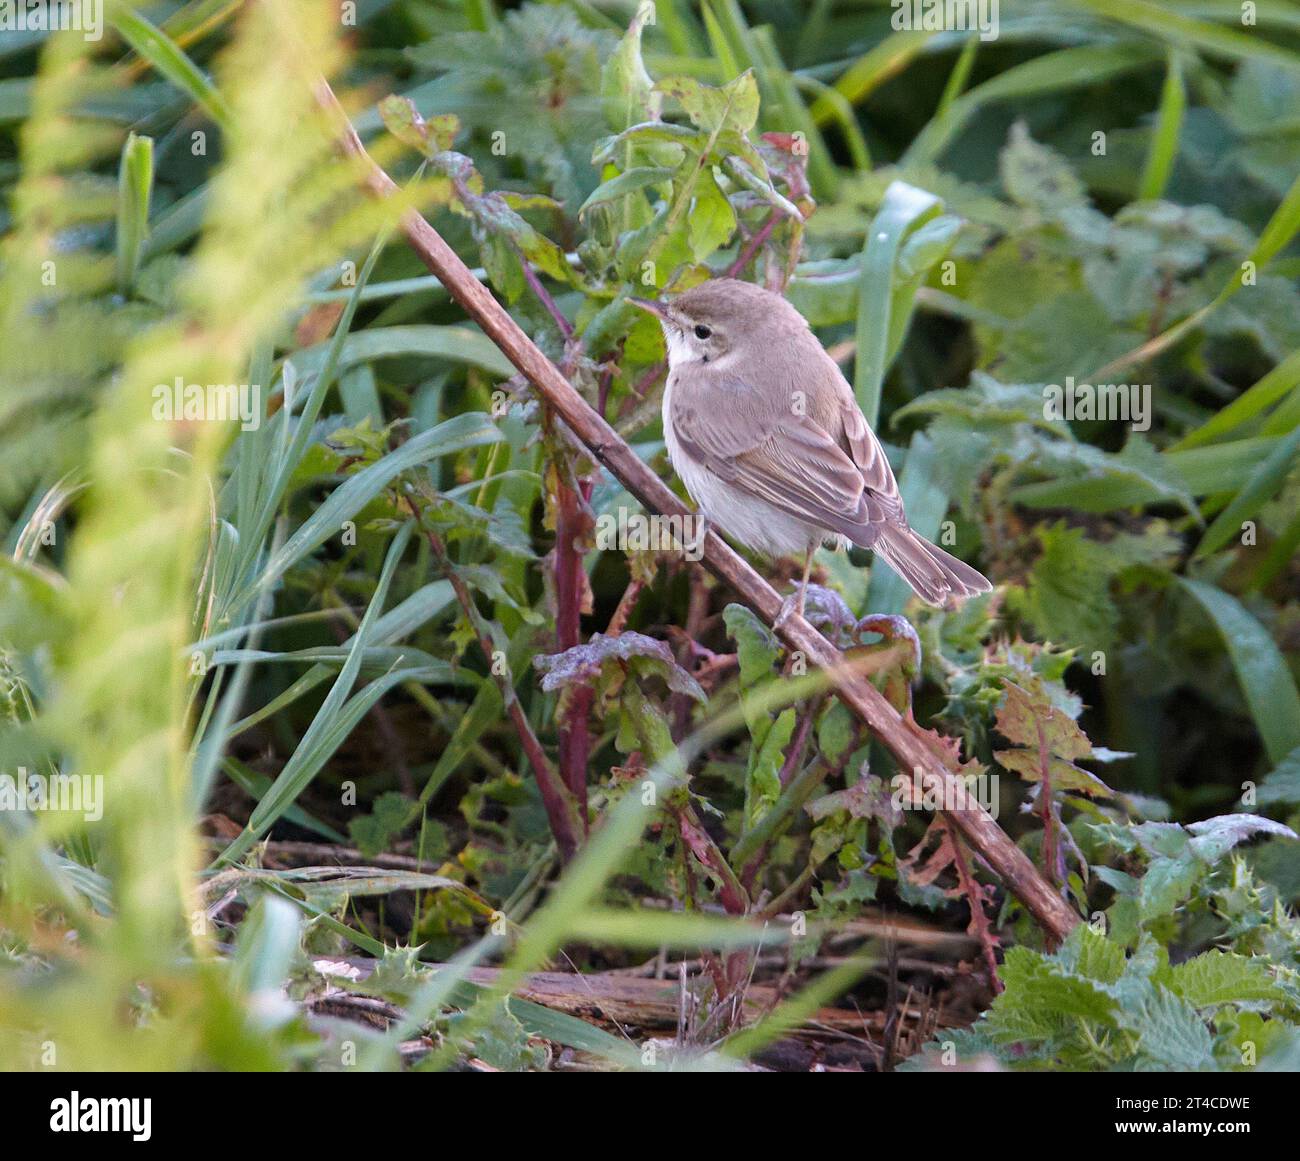 Booted warbler (Iduna caligata, Hippolais caligata), young booted warbler perching on a plant stem, United Kingdom, England, Isles of Scilly Stock Photo